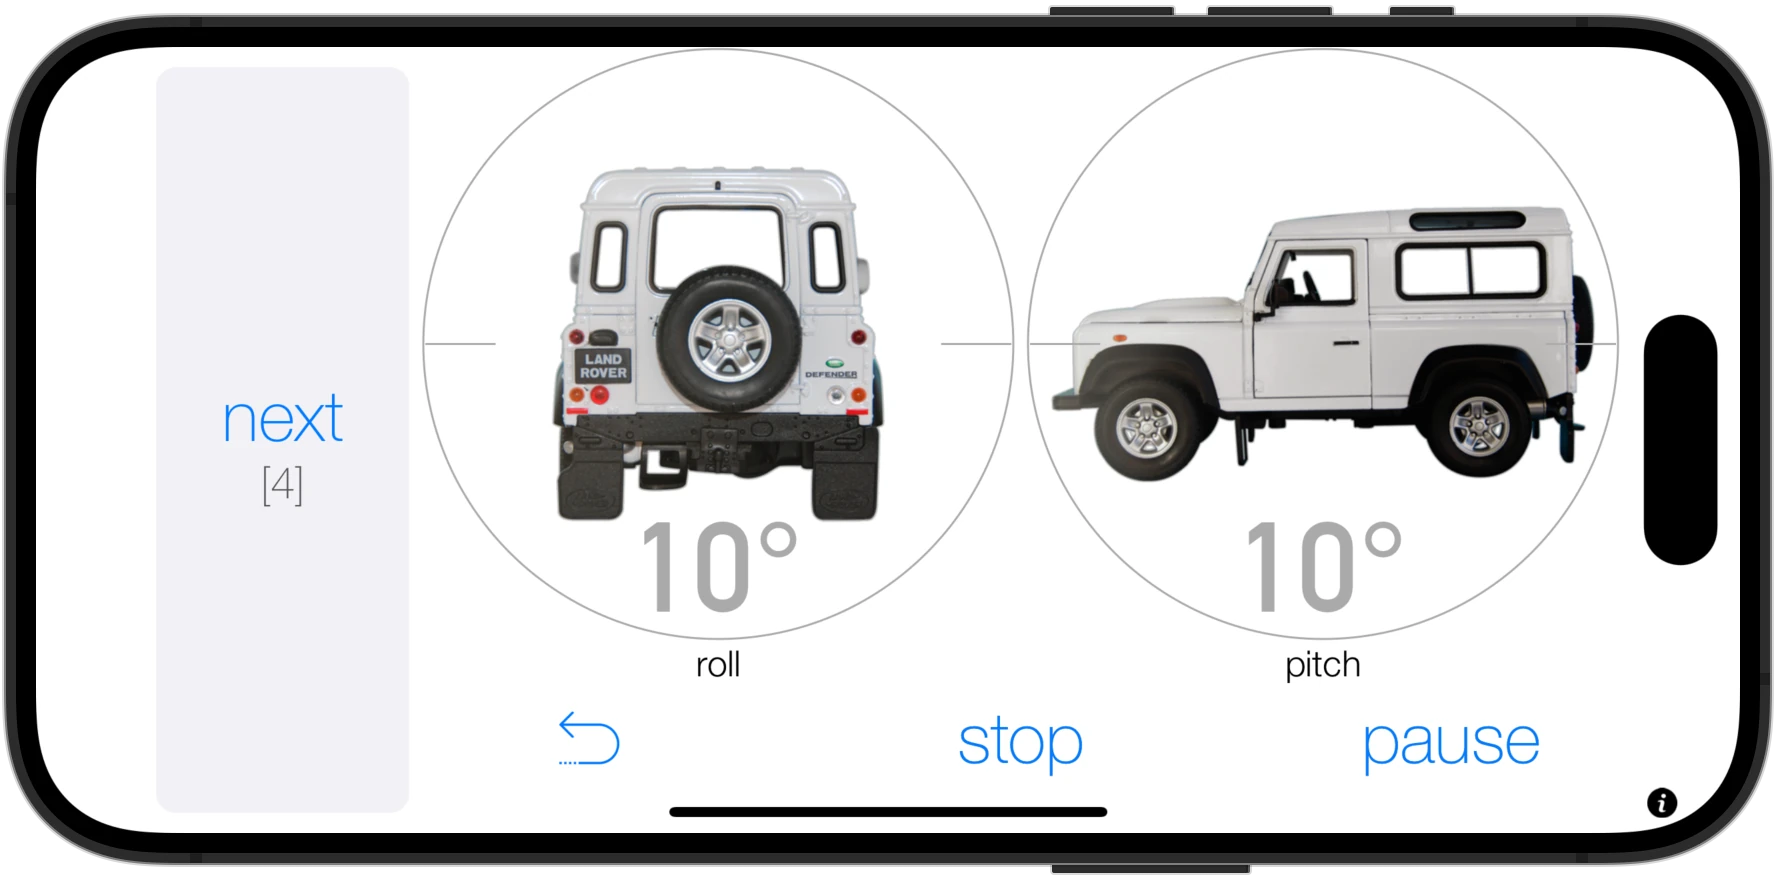 3pMaster - Tripmaster Odometer App for Off-Road for iPad and iPhone Inclinometer Roll and Pitch